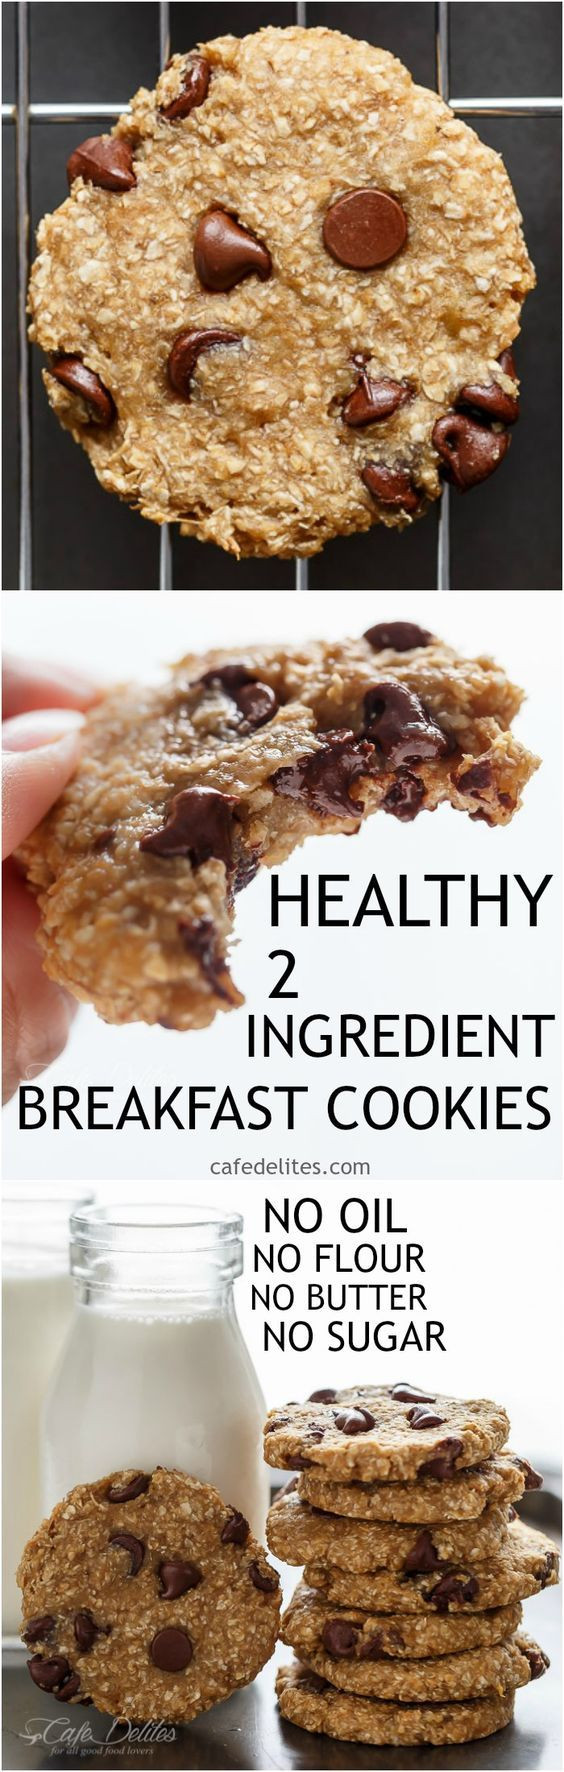 Healthy Sweet Snack Recipes For Weight Loss
 The 25 best Healthy snacks ideas on Pinterest